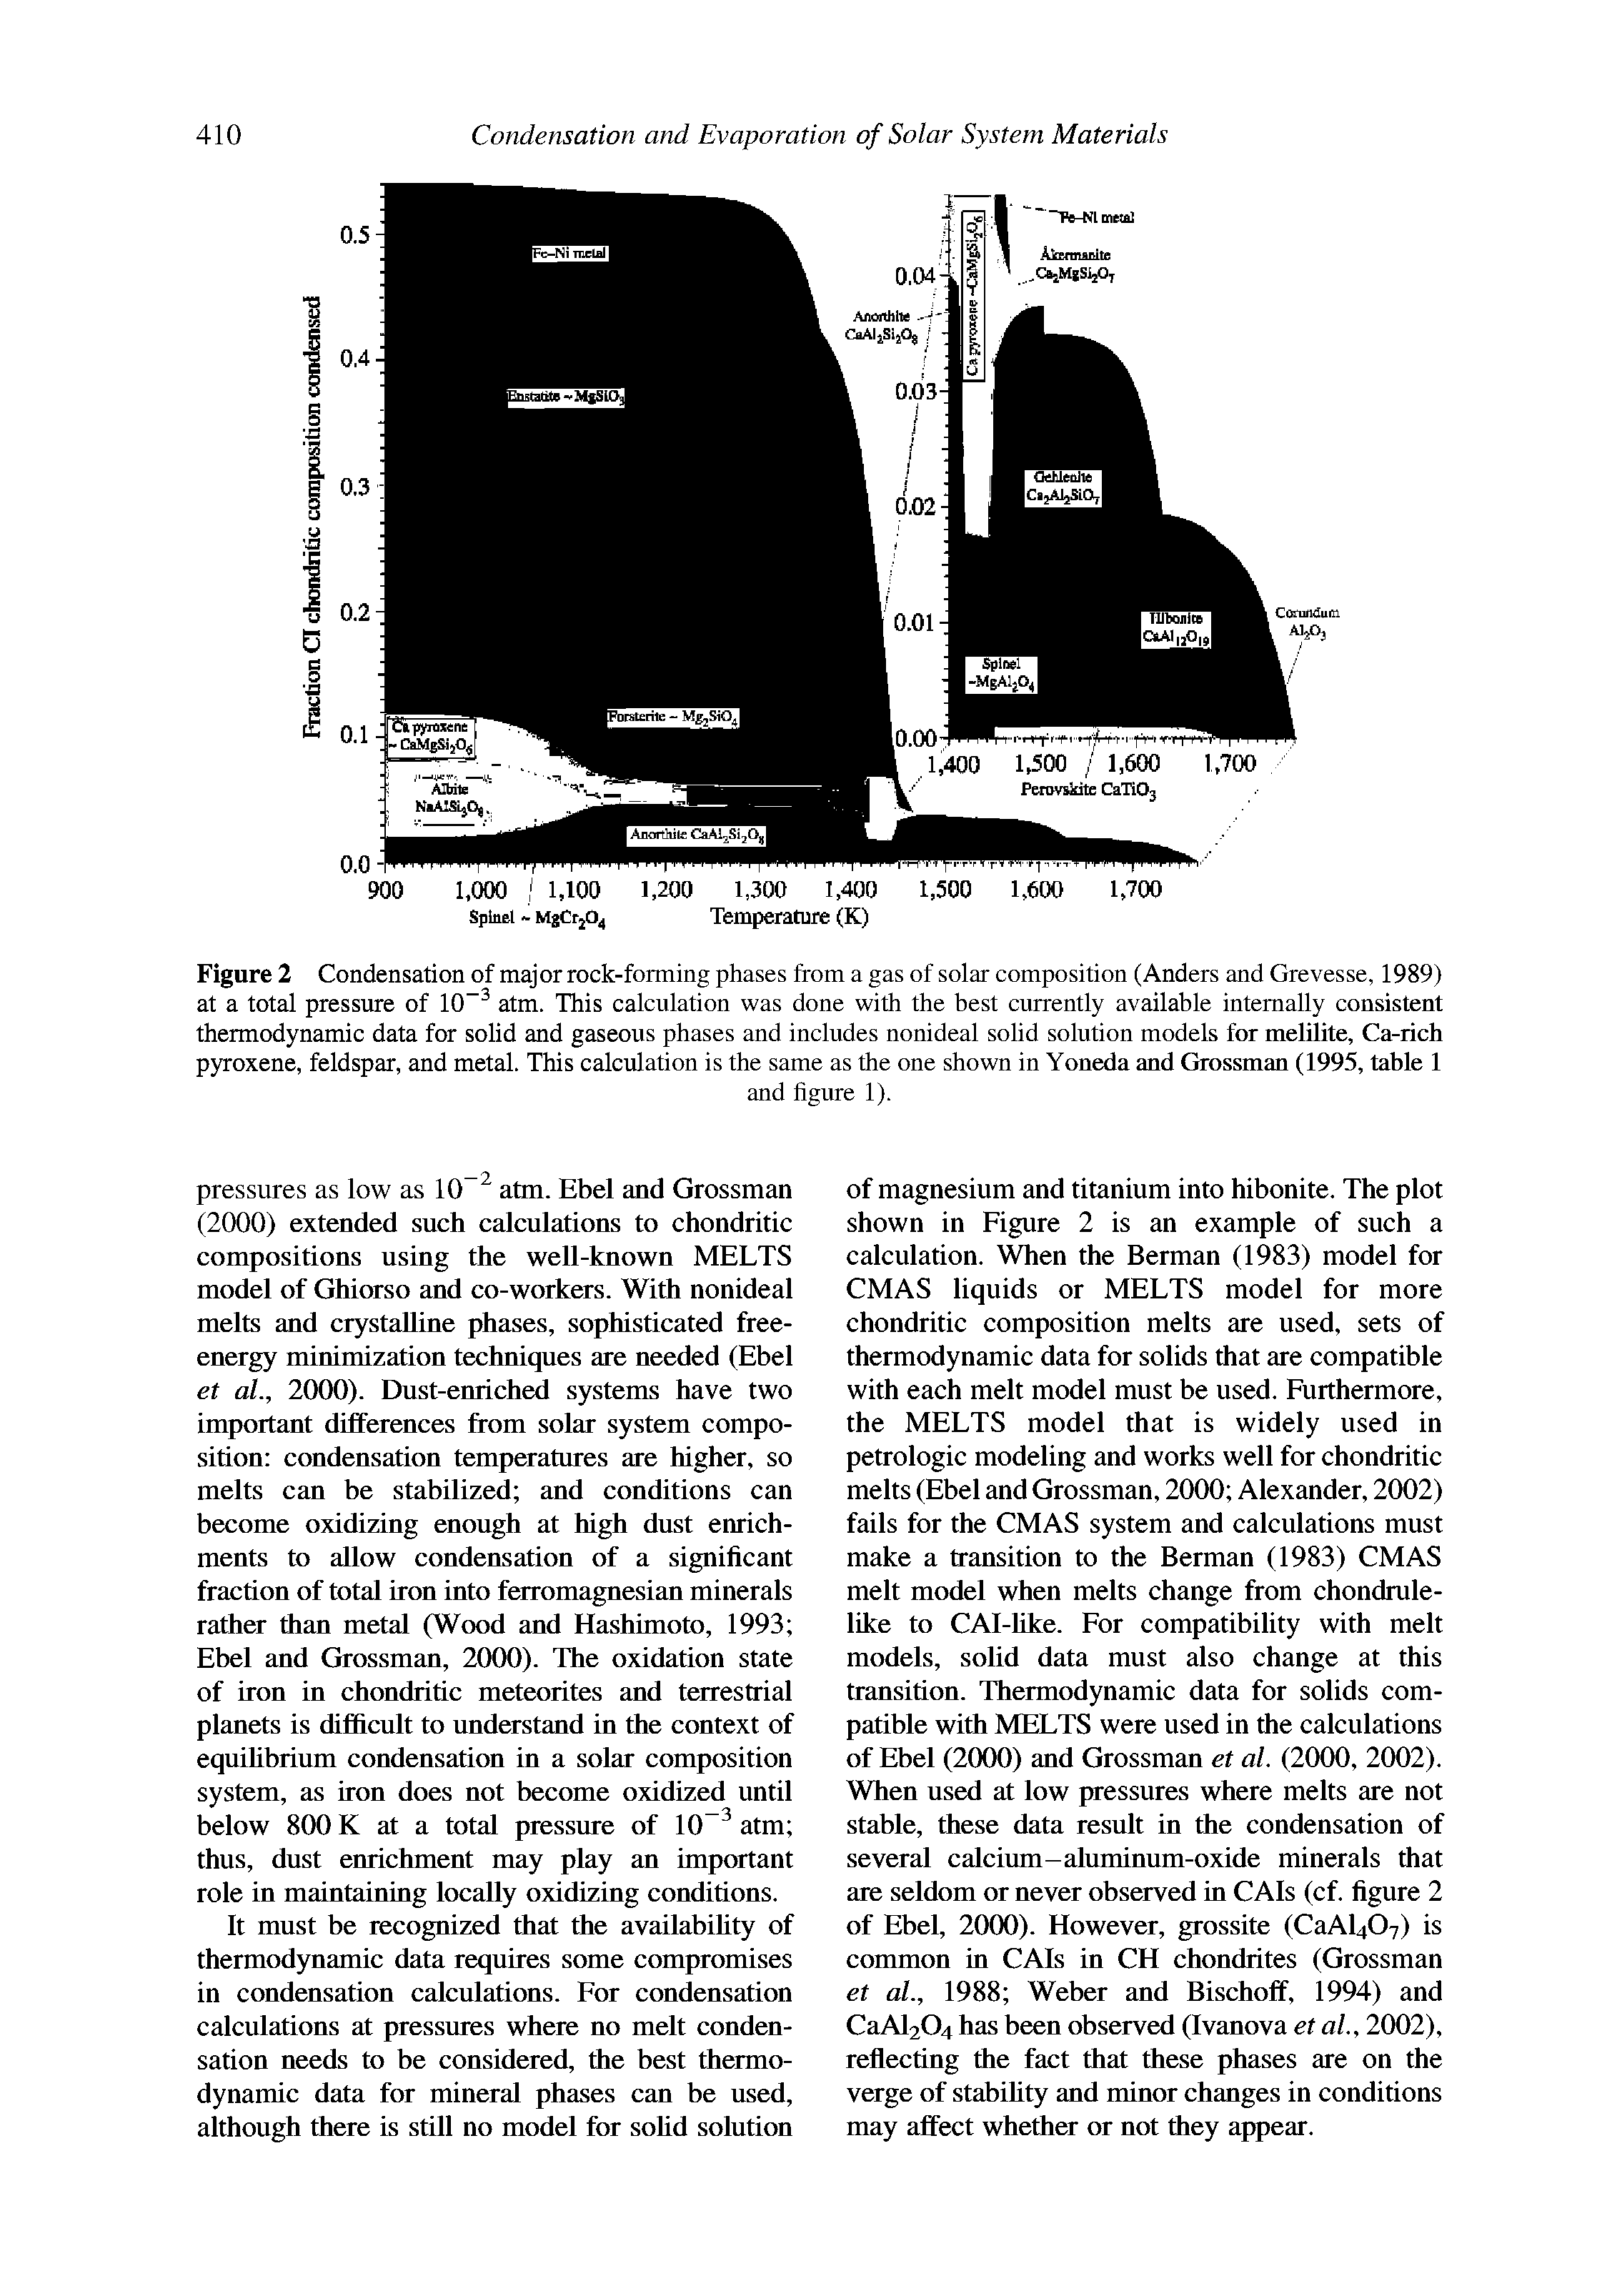 Figure 2 Condensation of major rock-forming phases from a gas of solar composition (Anders and Grevesse, 1989) at a total pressure of 10 atm. This calculation was done with the best currently available internally consistent thermodynamic data for solid and gaseous phases and includes nonideal solid solution models for melilite, Ca-rich pyroxene, feldspar, and metal. This calculation is the same as the one shown in Yoneda and Grossman (1995, table 1...